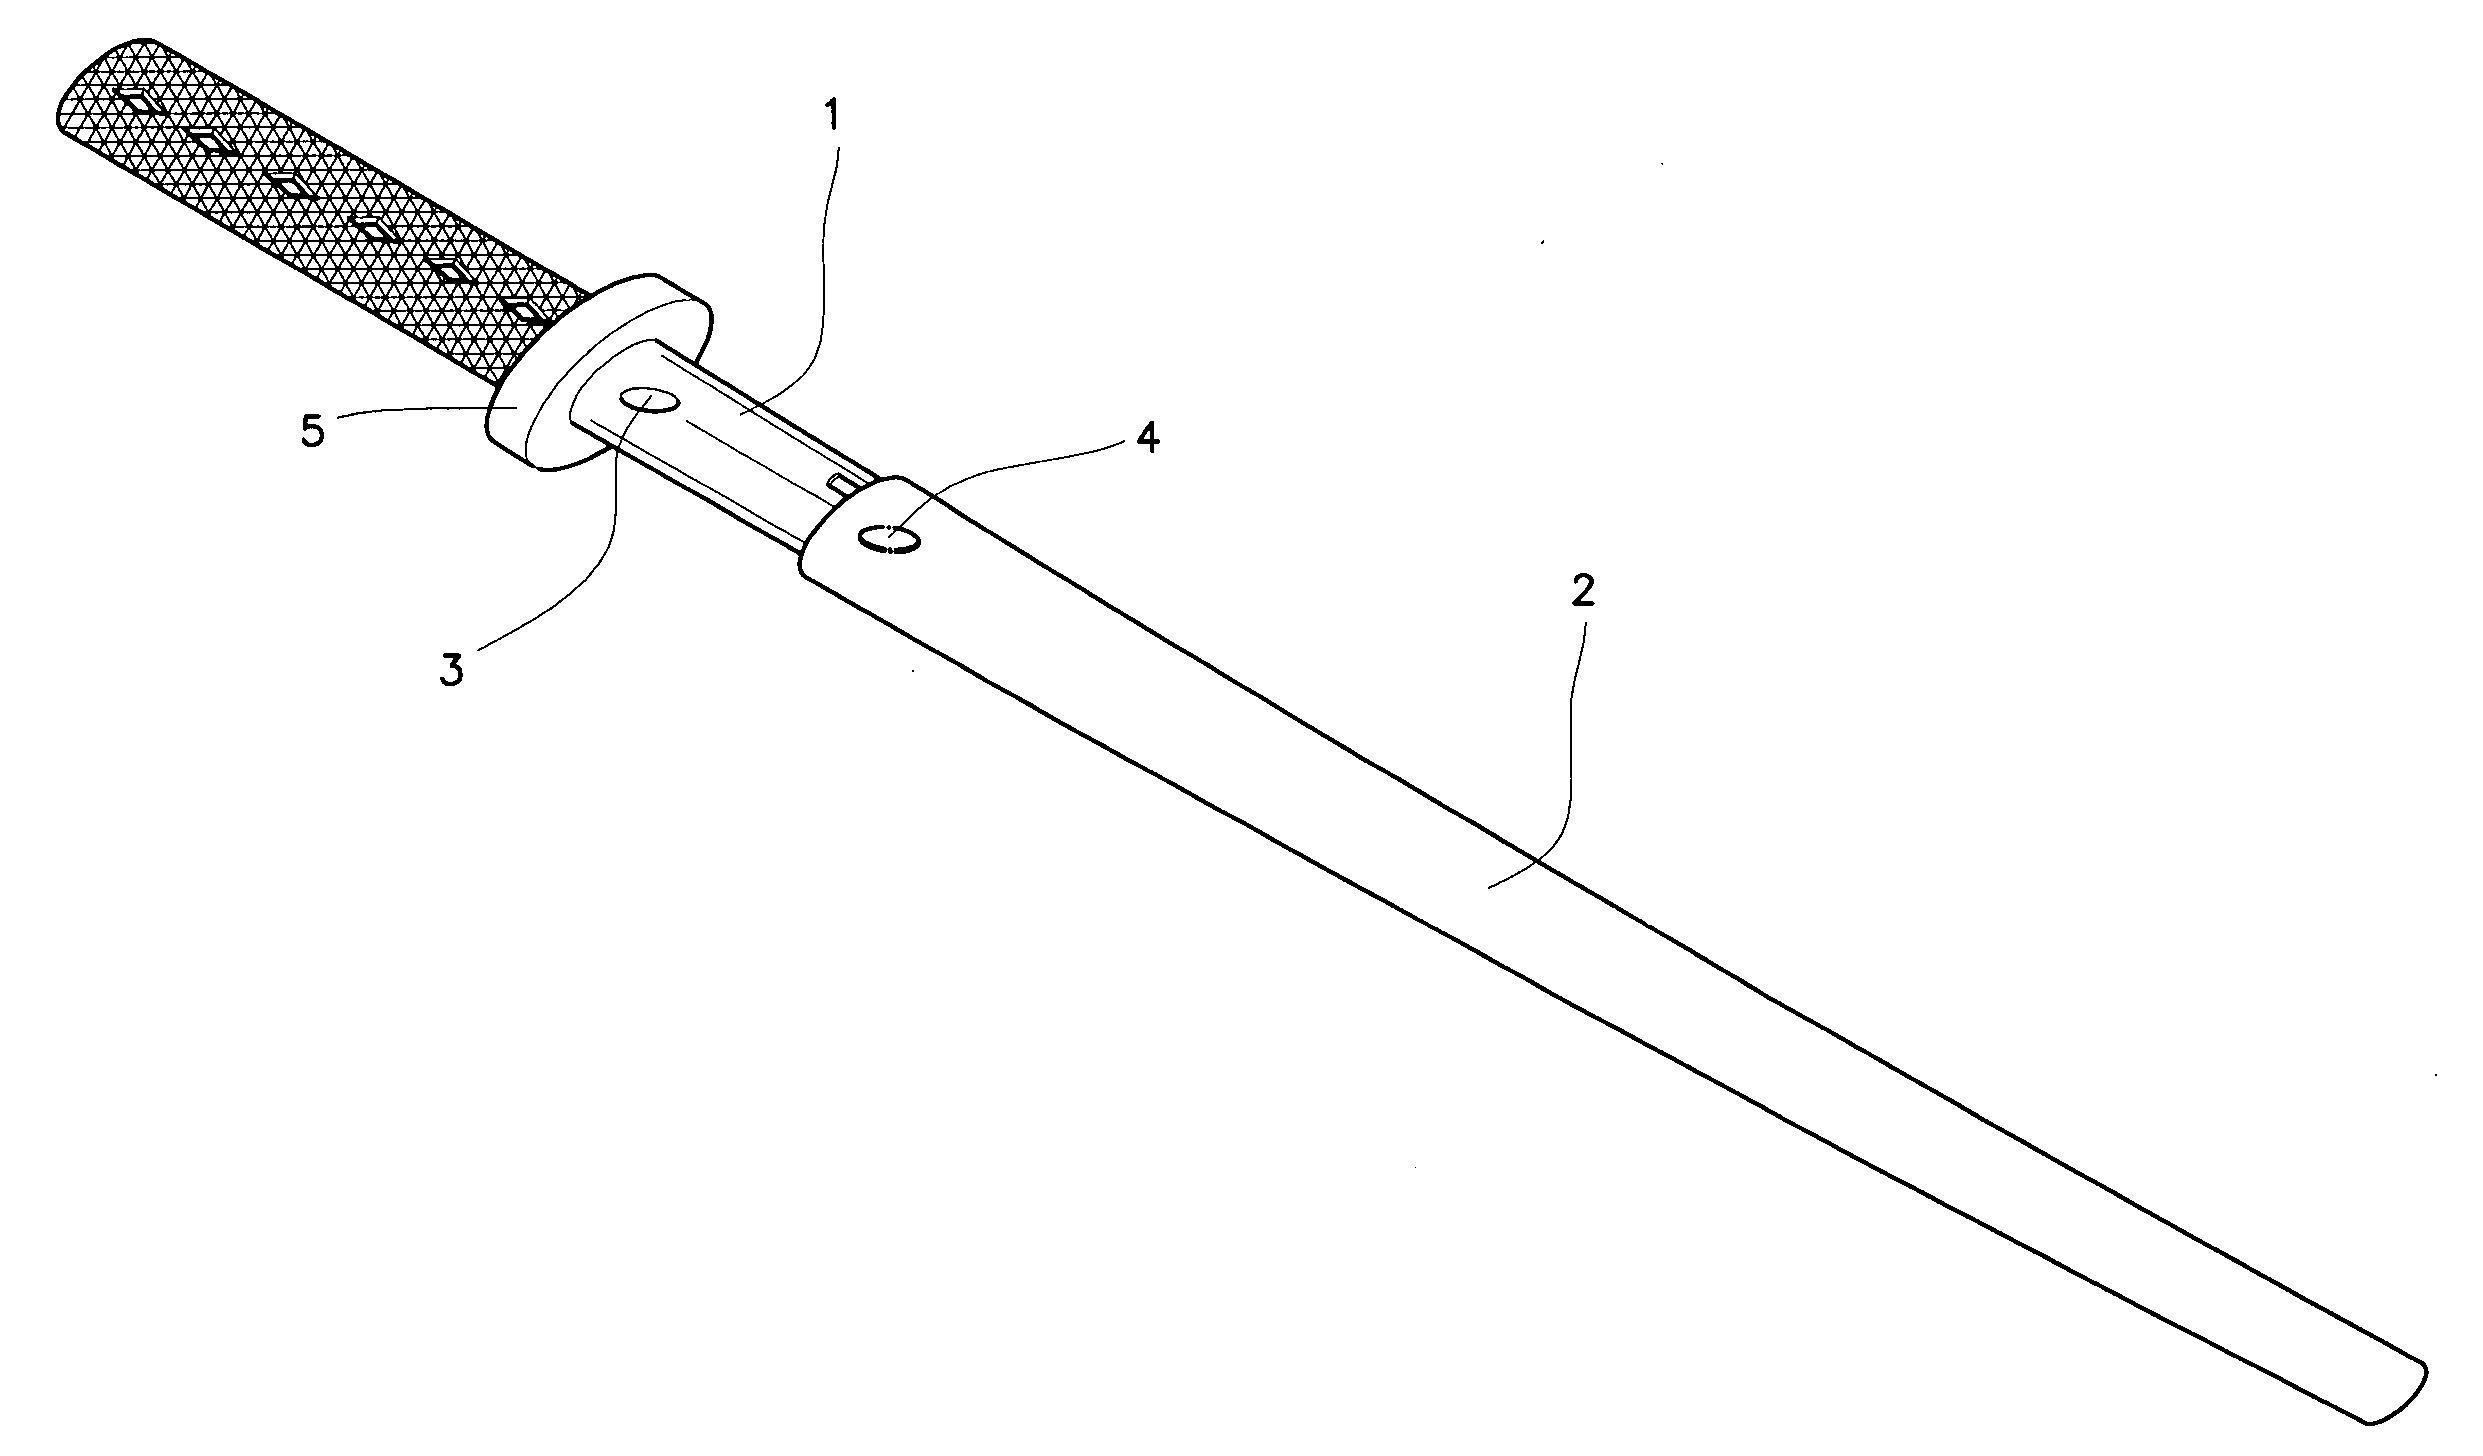 Structure for fastening sword blade to scabbard